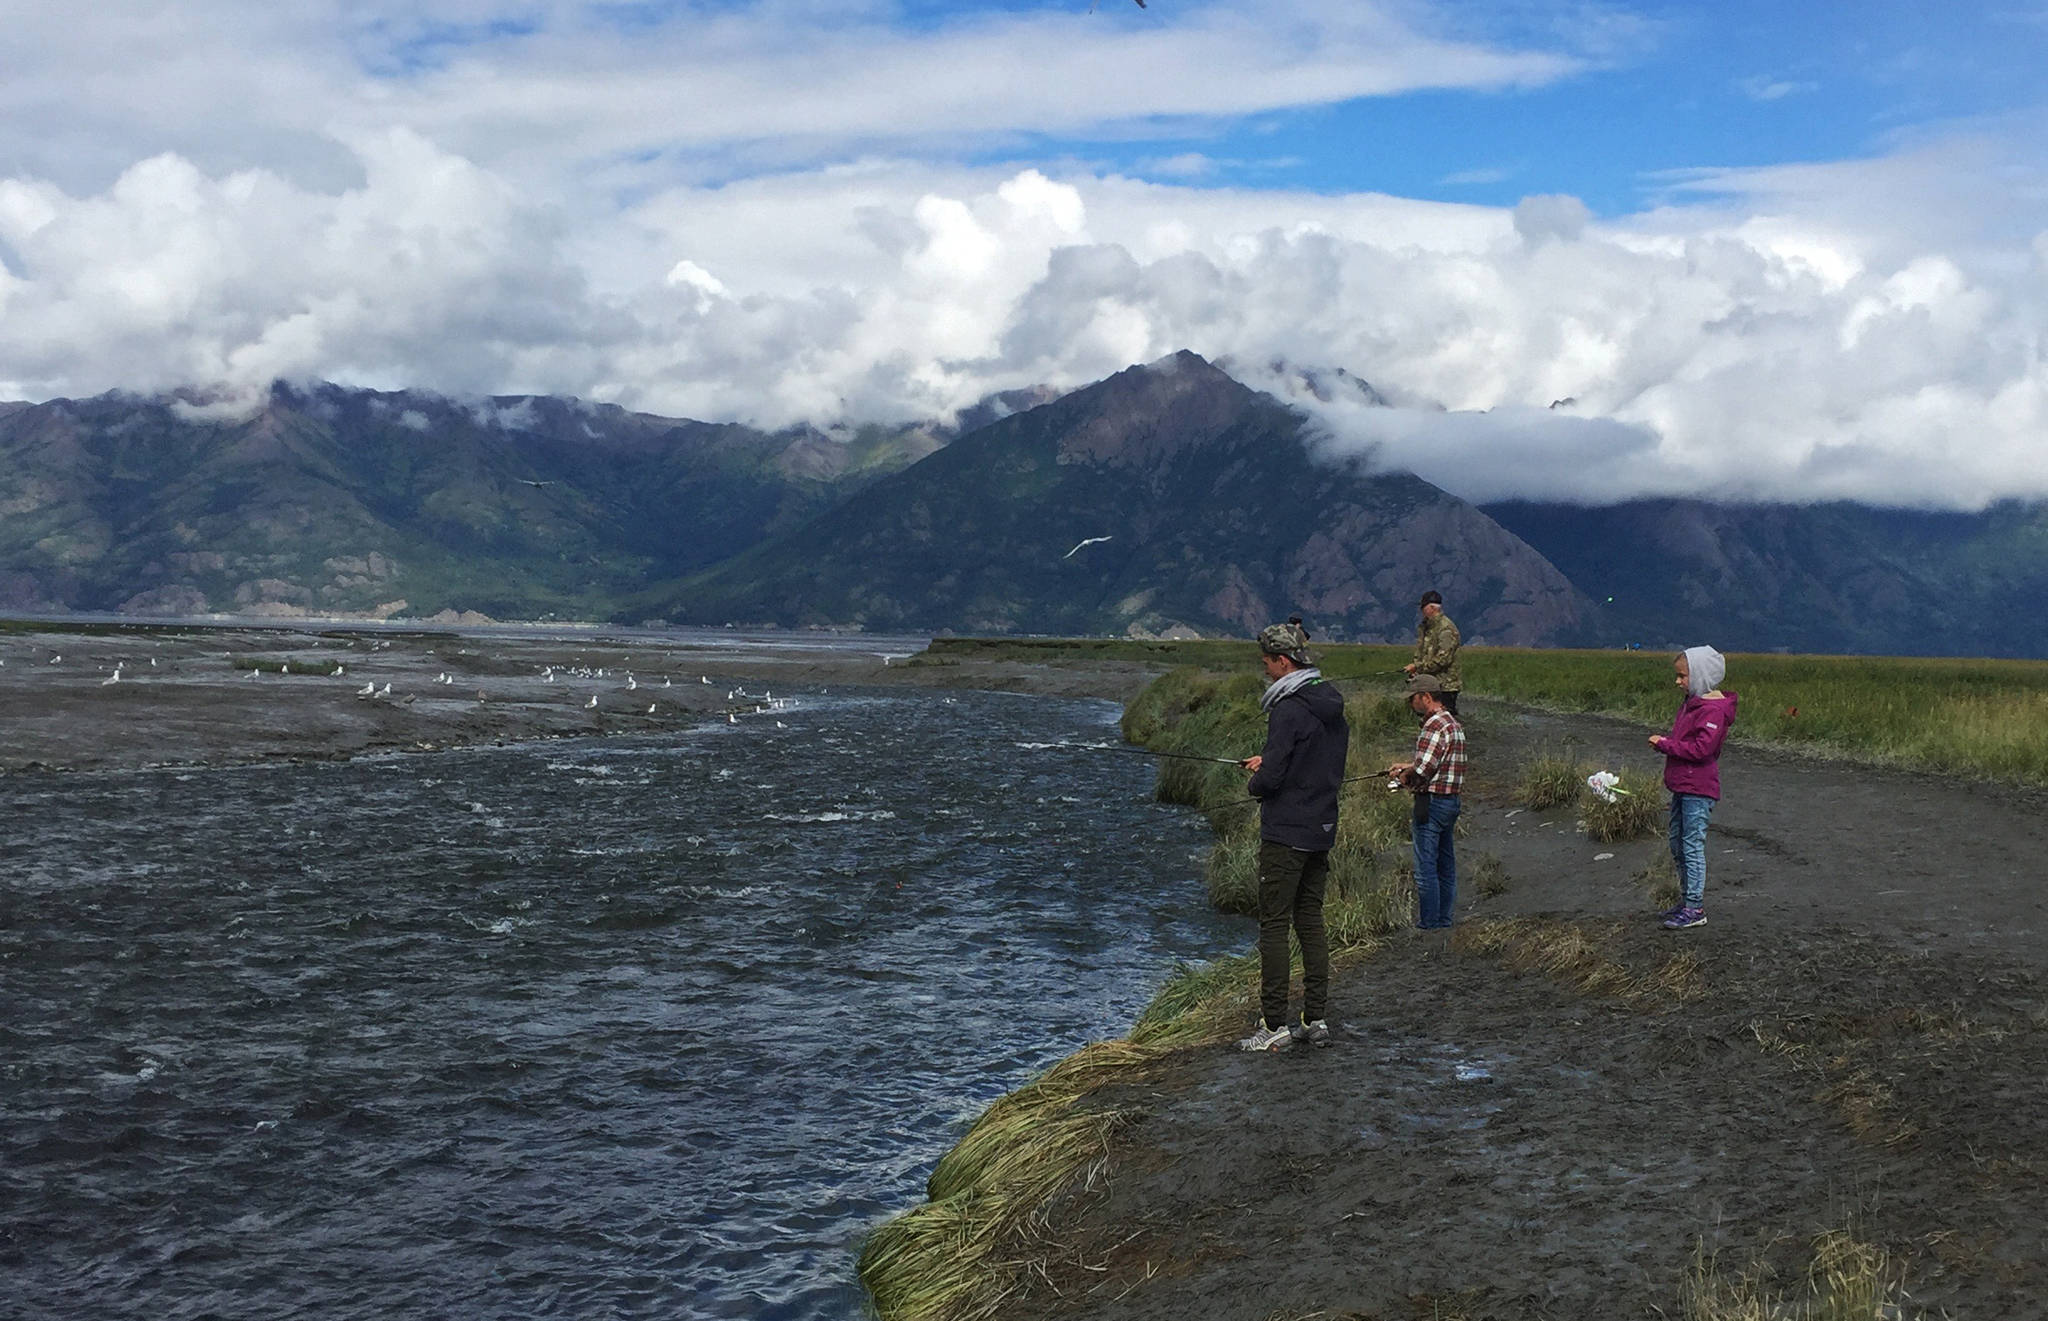 Anglers cast for pink and silver salmon from the banks of Resurrection Creek near its confluence with the Turnagain Arm of Cook Inlet on Sunday, Aug. 13, 2017 in Hope, Alaska. Pink salmon can return in large numbers to the creek in the late summer and early fall. (Photo by Elizabeth Earl/Peninsula Clarion)